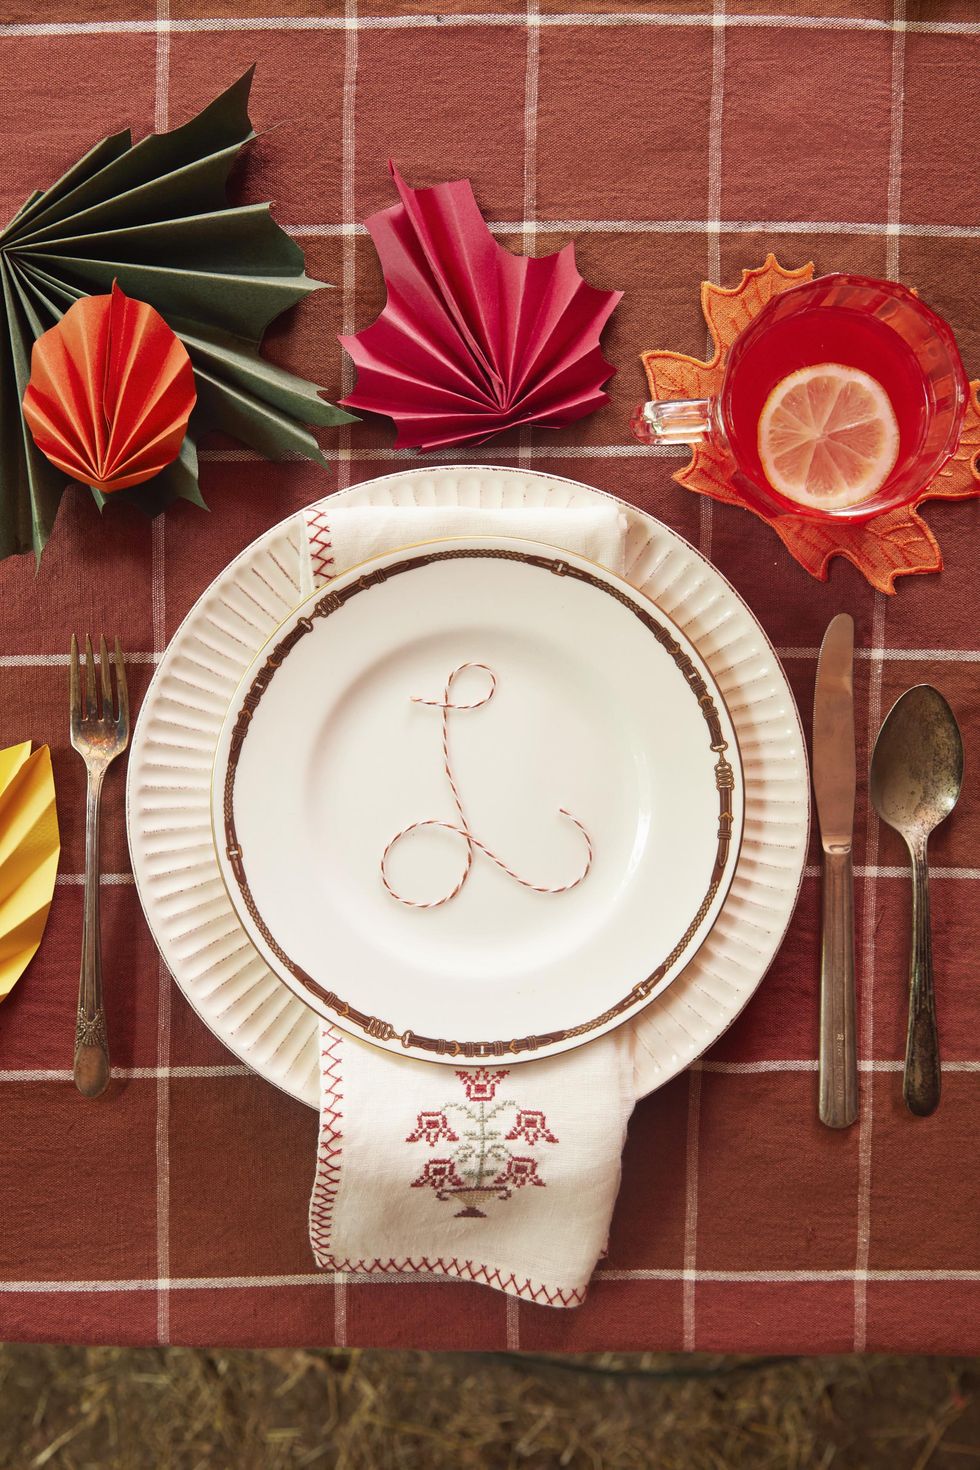 5 Steps to Set an Outdoor Thanksgiving Table - Sanctuary Home Decor